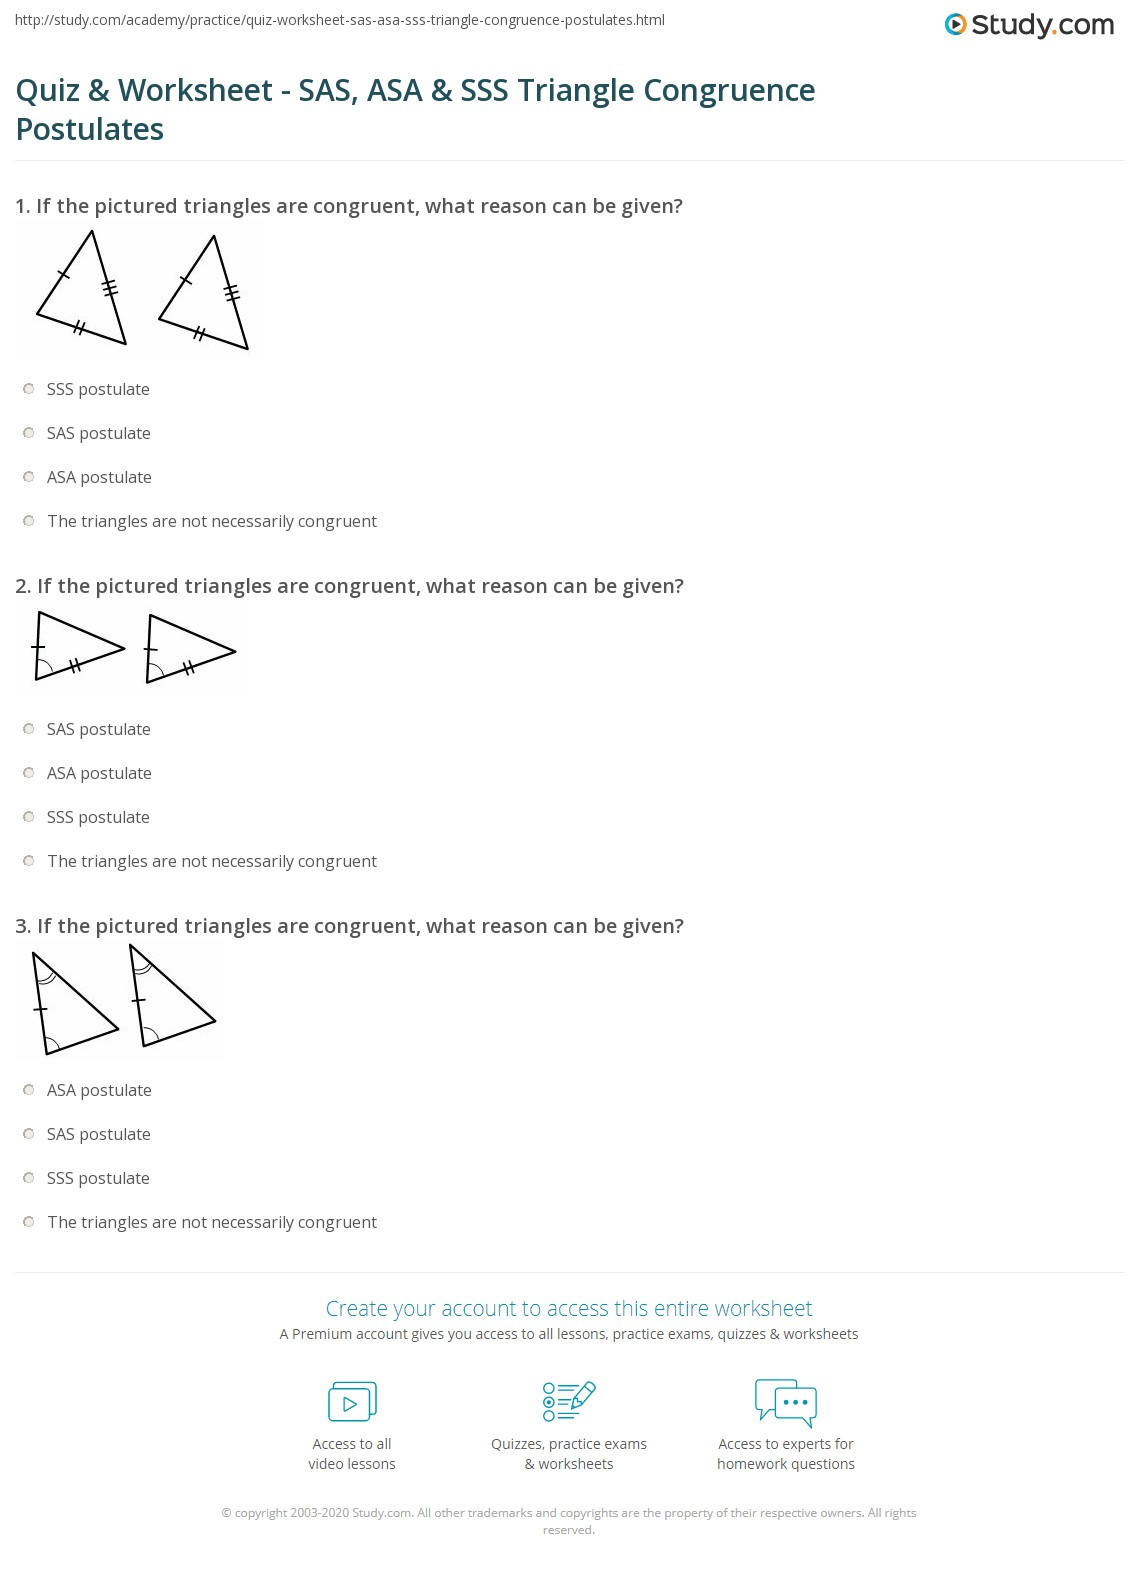 Proving Triangles Congruent Worksheet Answers Quiz &amp; Worksheet Sas asa &amp; Sss Triangle Congruence